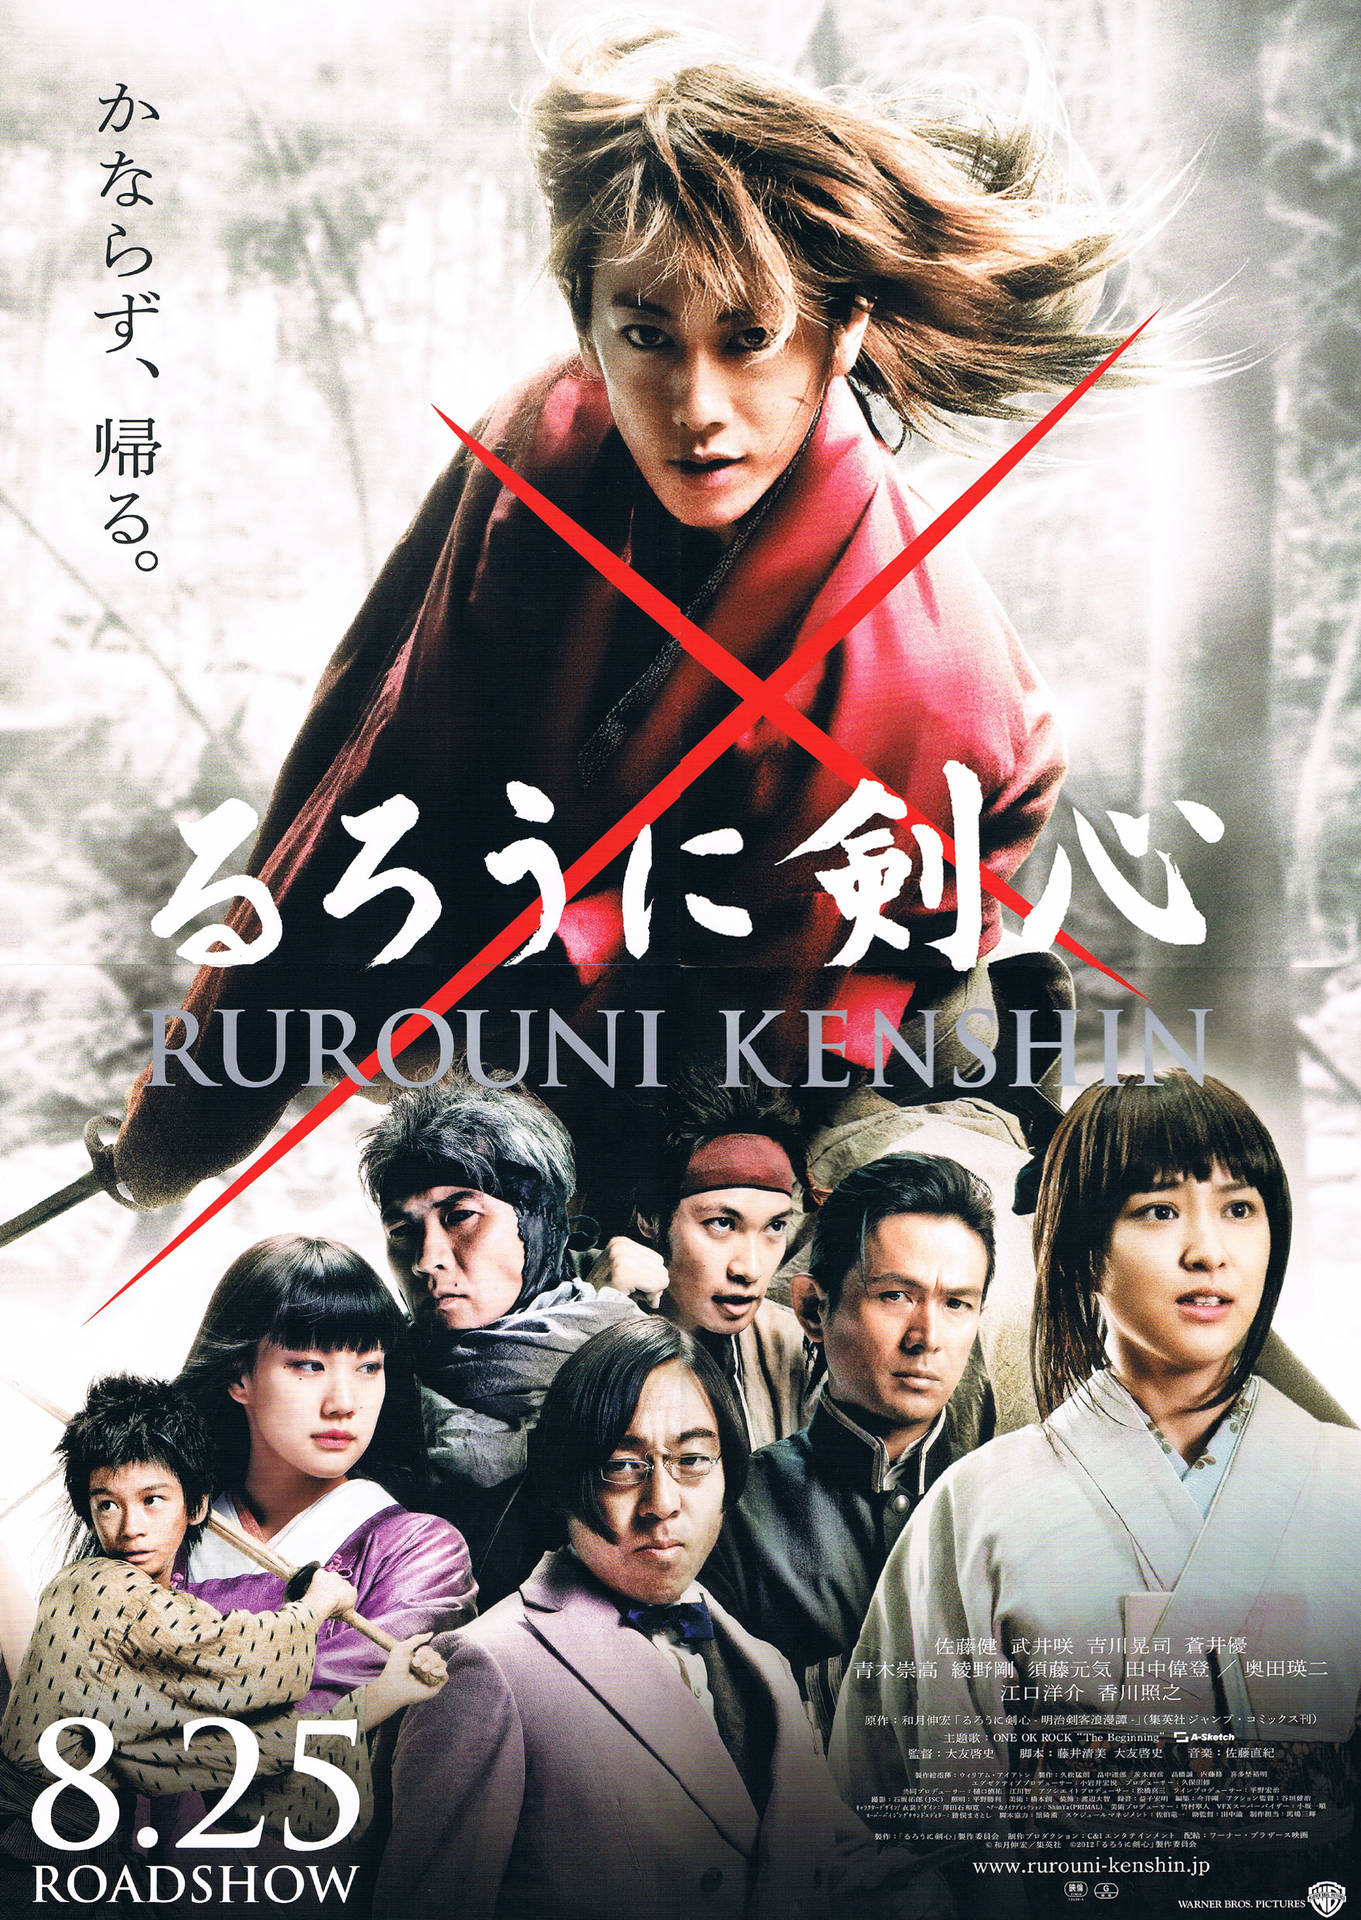 Rurouni Kenshin Official Poster Background